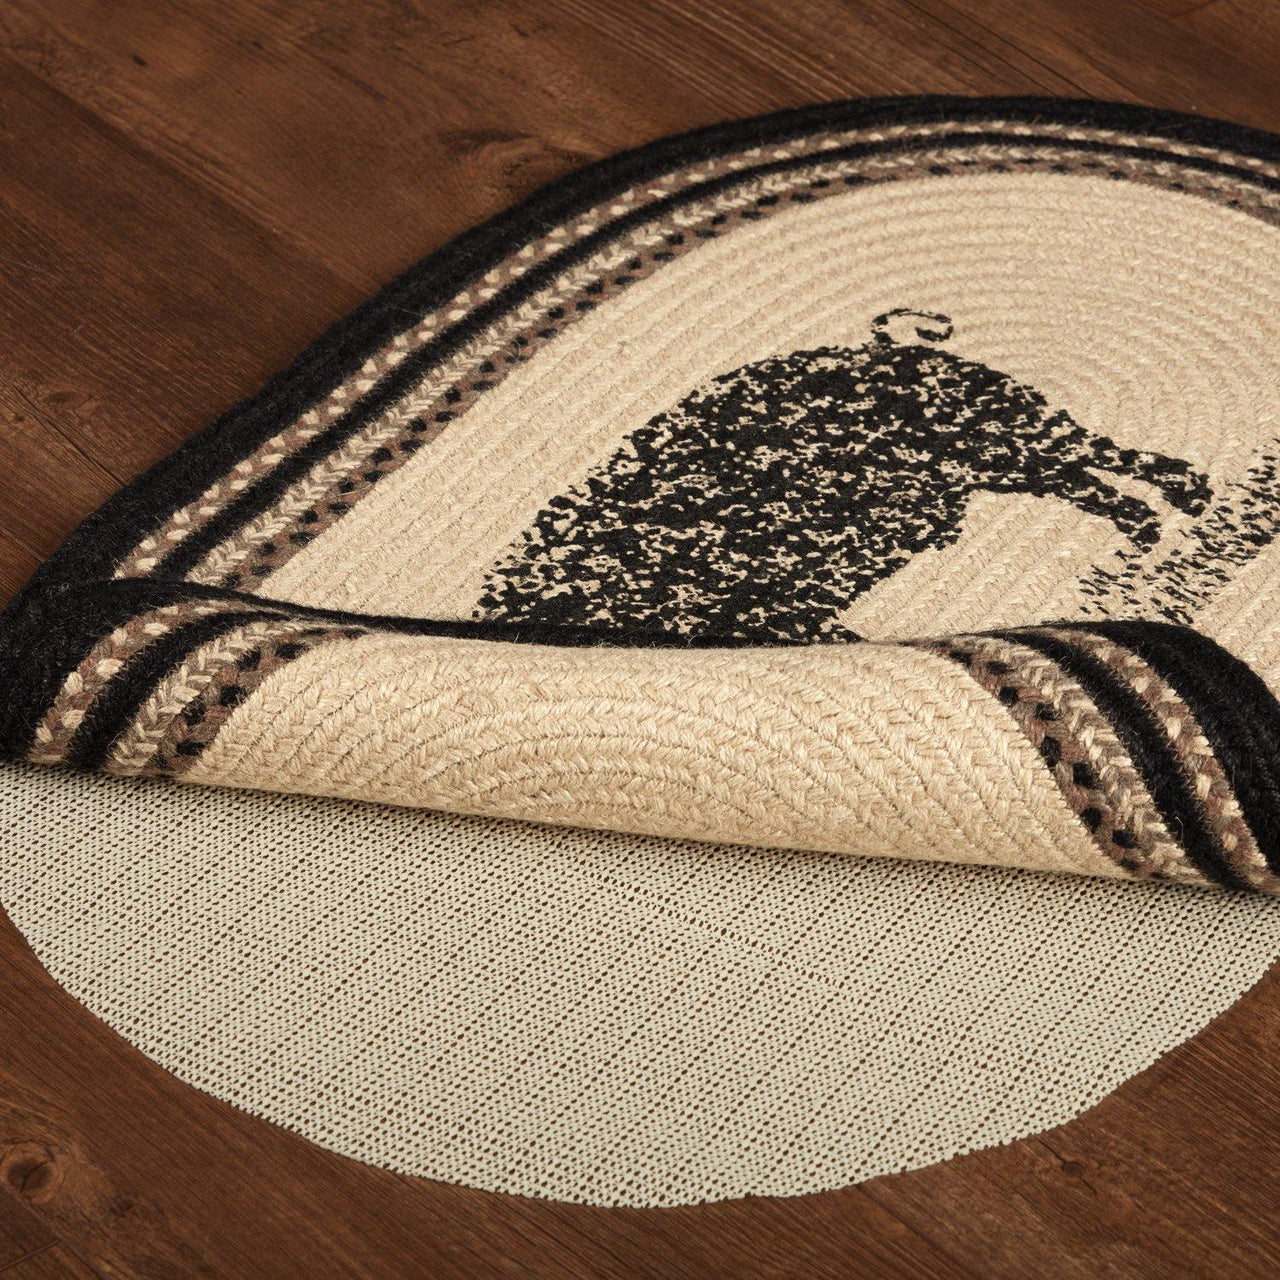 Sawyer Mill Charcoal Pig Jute Braided Rug Oval 20"x30" with Rug Pad VHC Brands - The Fox Decor